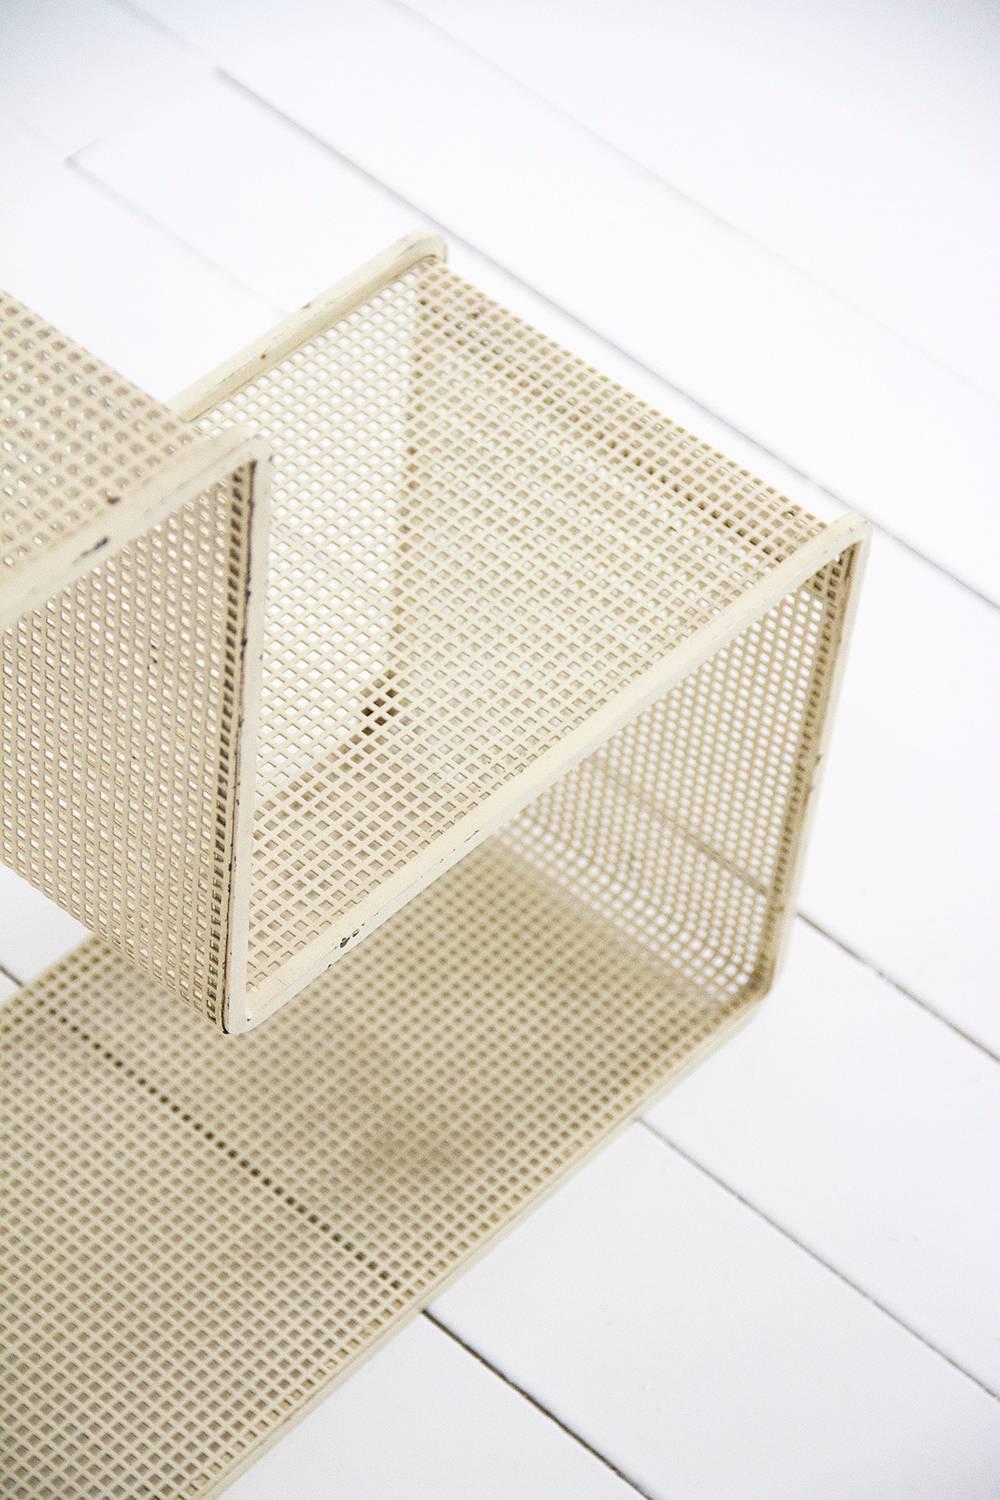 Mid-Century Modern Dedal Wall Shelf by Mathieu Mategot, Perforated Steel, France, circa 1950 For Sale